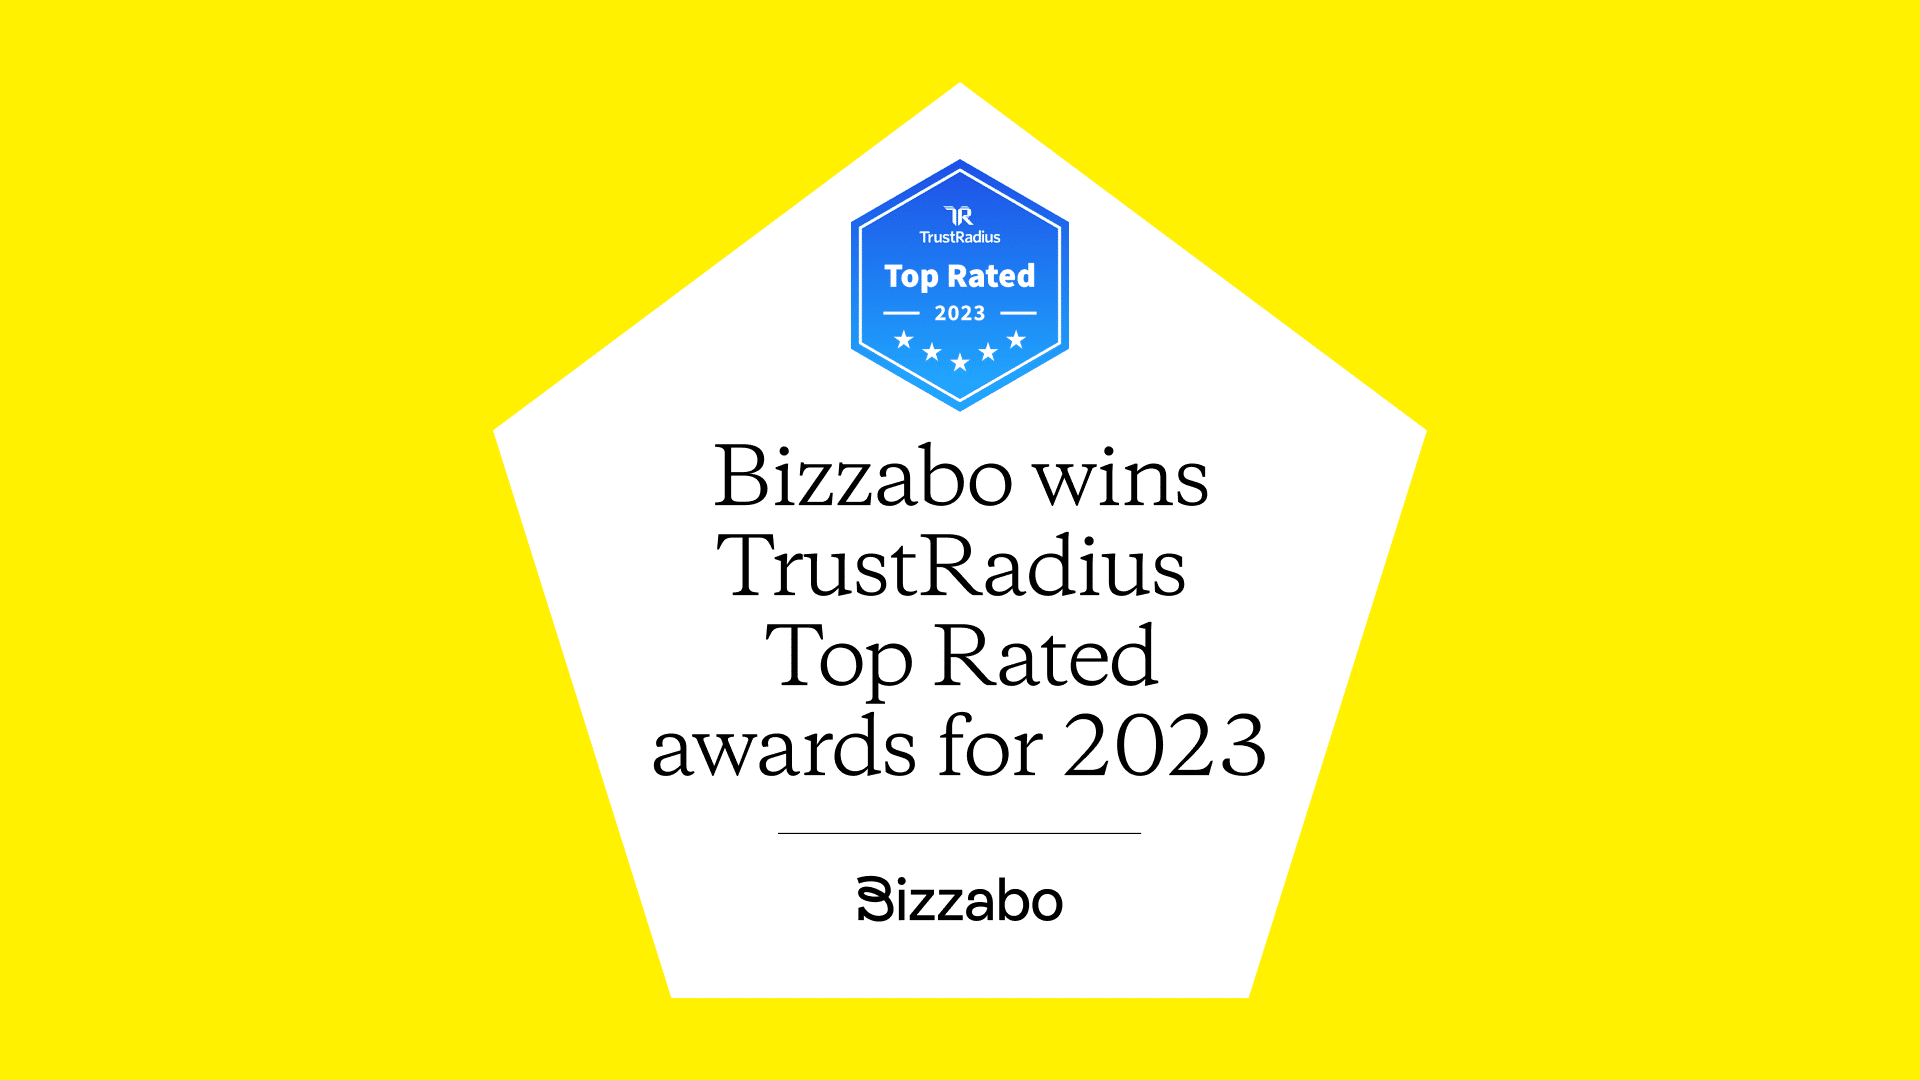 Bizzabo Wins 3 Top Rated Awards in 2023 TrustRadius Reports